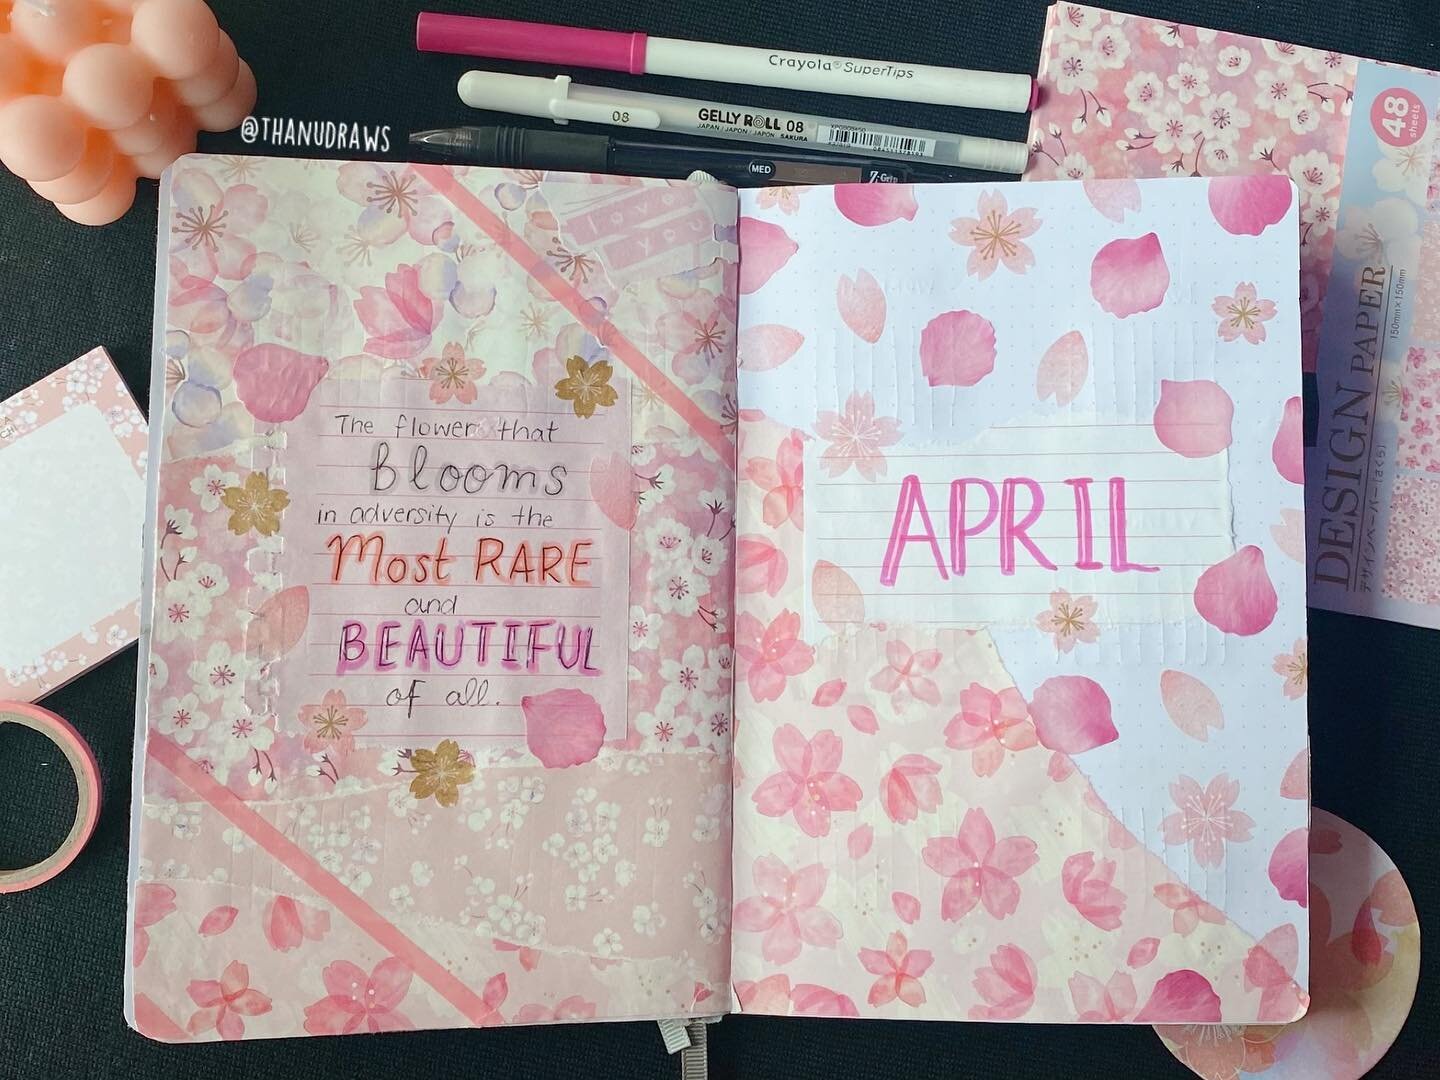 April cover &amp; inspiring quote from Mulan 🌸 I love seeing all the cherry blossom trees on my island in Animal Crossing!!💖